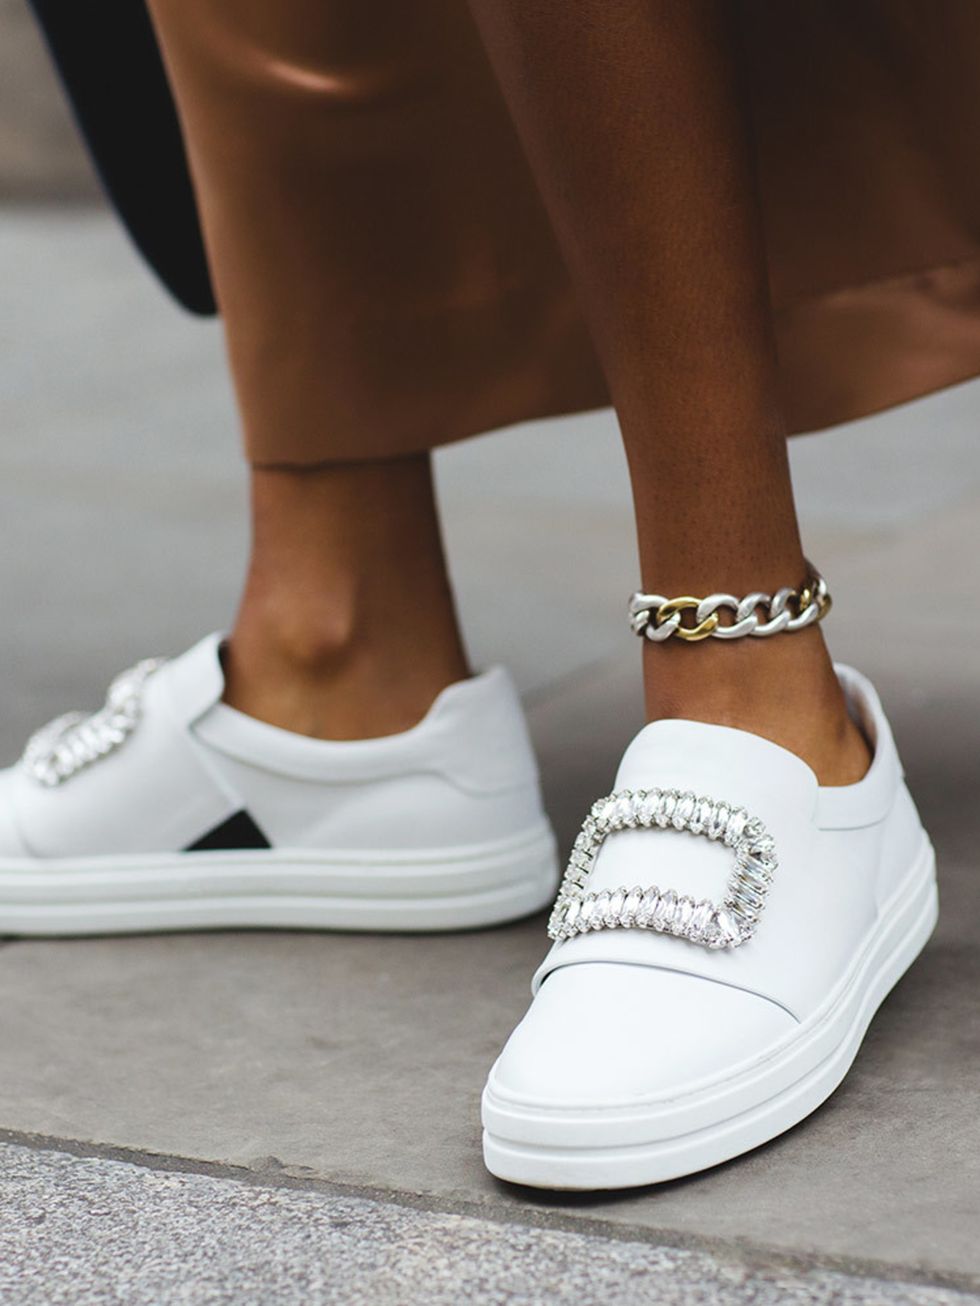 <p>All those cropped trousers have left our ankles bare. So let&rsquo;s refocus,&nbsp;and repurpose our bracelets as anklets. At Chlo&eacute; the vibe was easy breezy, while the perfectly clunking ankle chains worn at&nbsp; Calvin Klein were a trainer gir